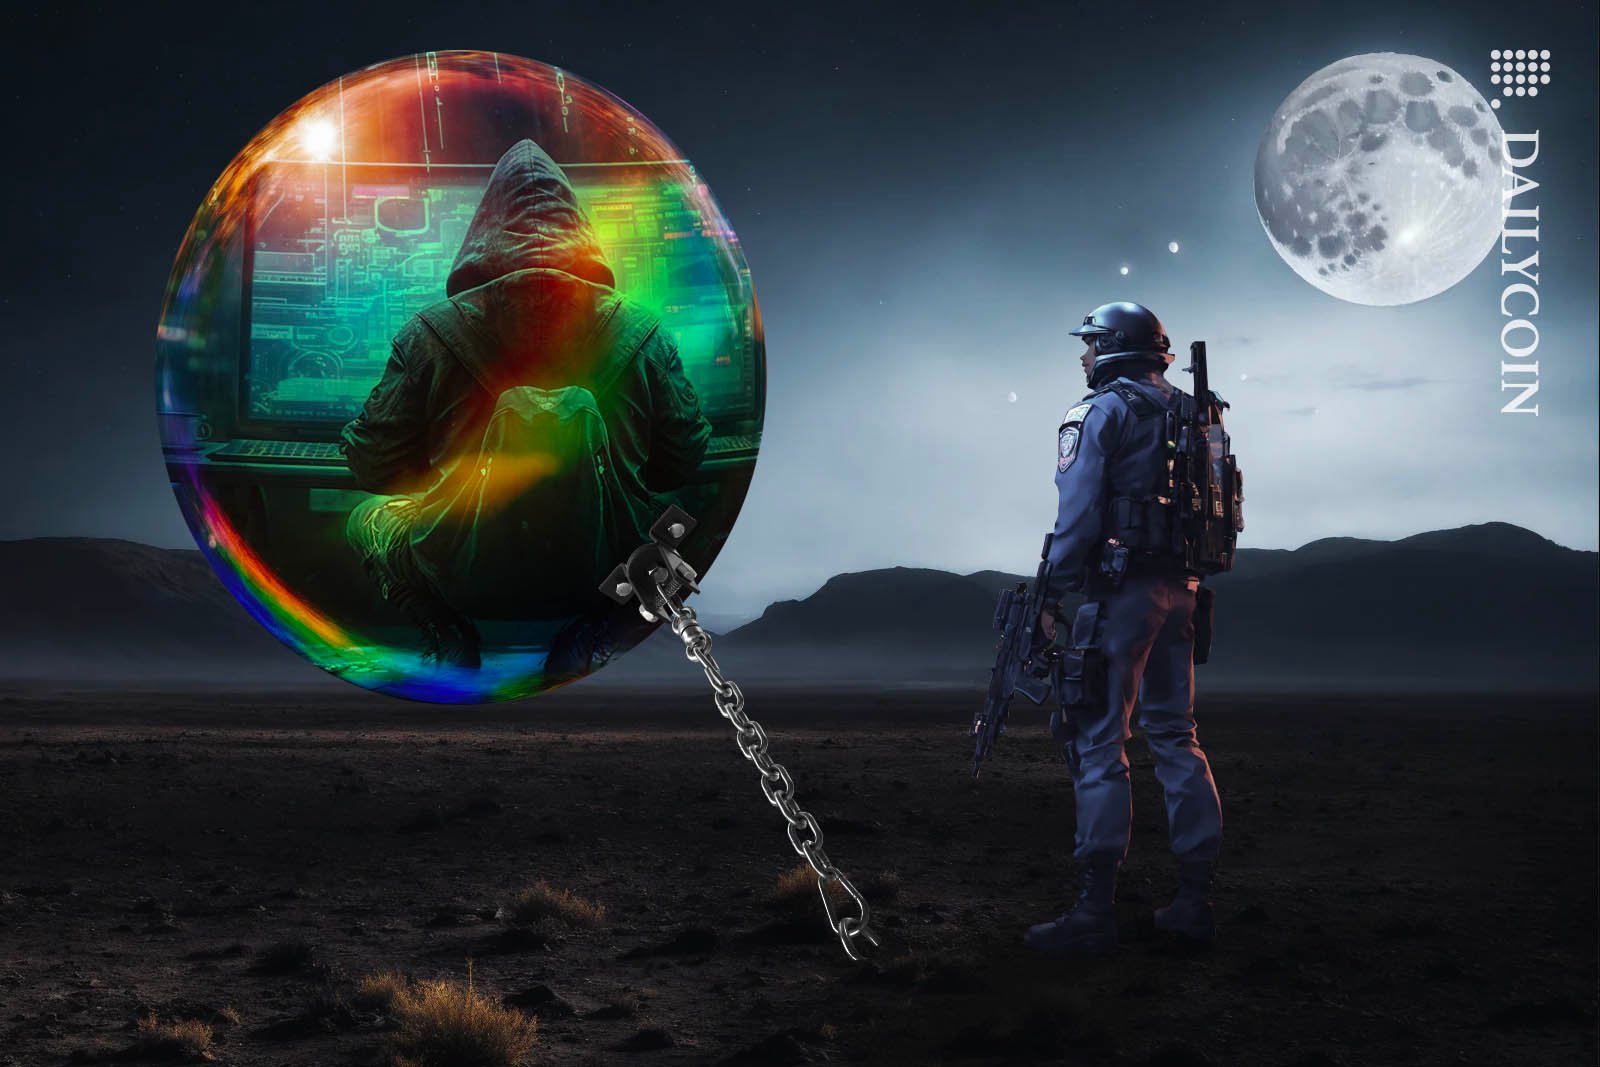 Futurisctic police officer looking at a colourful sphere with a hacker sitting in it, chained to the ground.